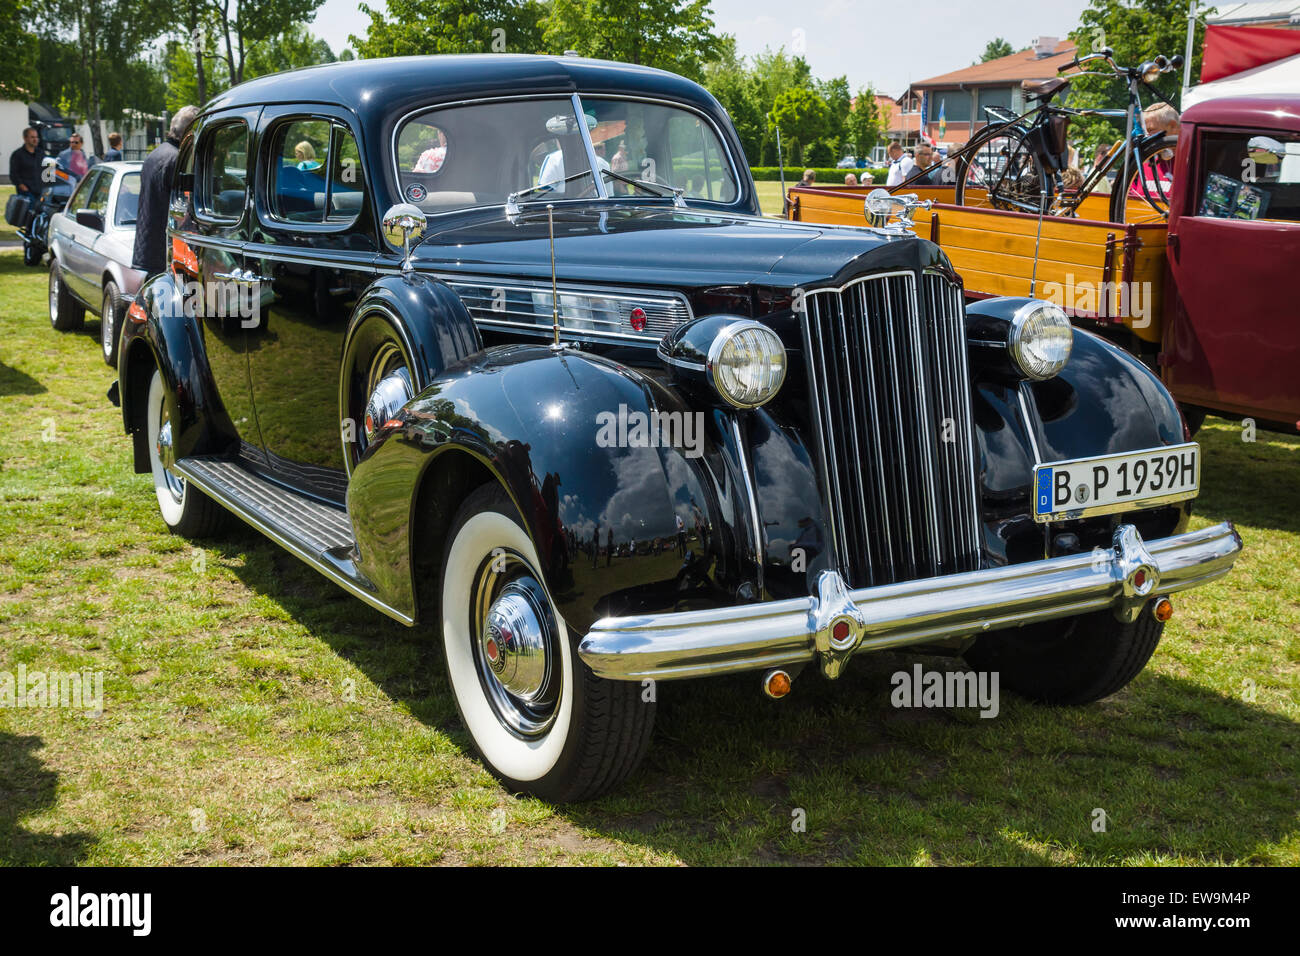 PAAREN IM GLIEN, GERMANY - MAY 23, 2015: Vintage car Packard Super Eight. The oldtimer show in MAFZ. Stock Photo